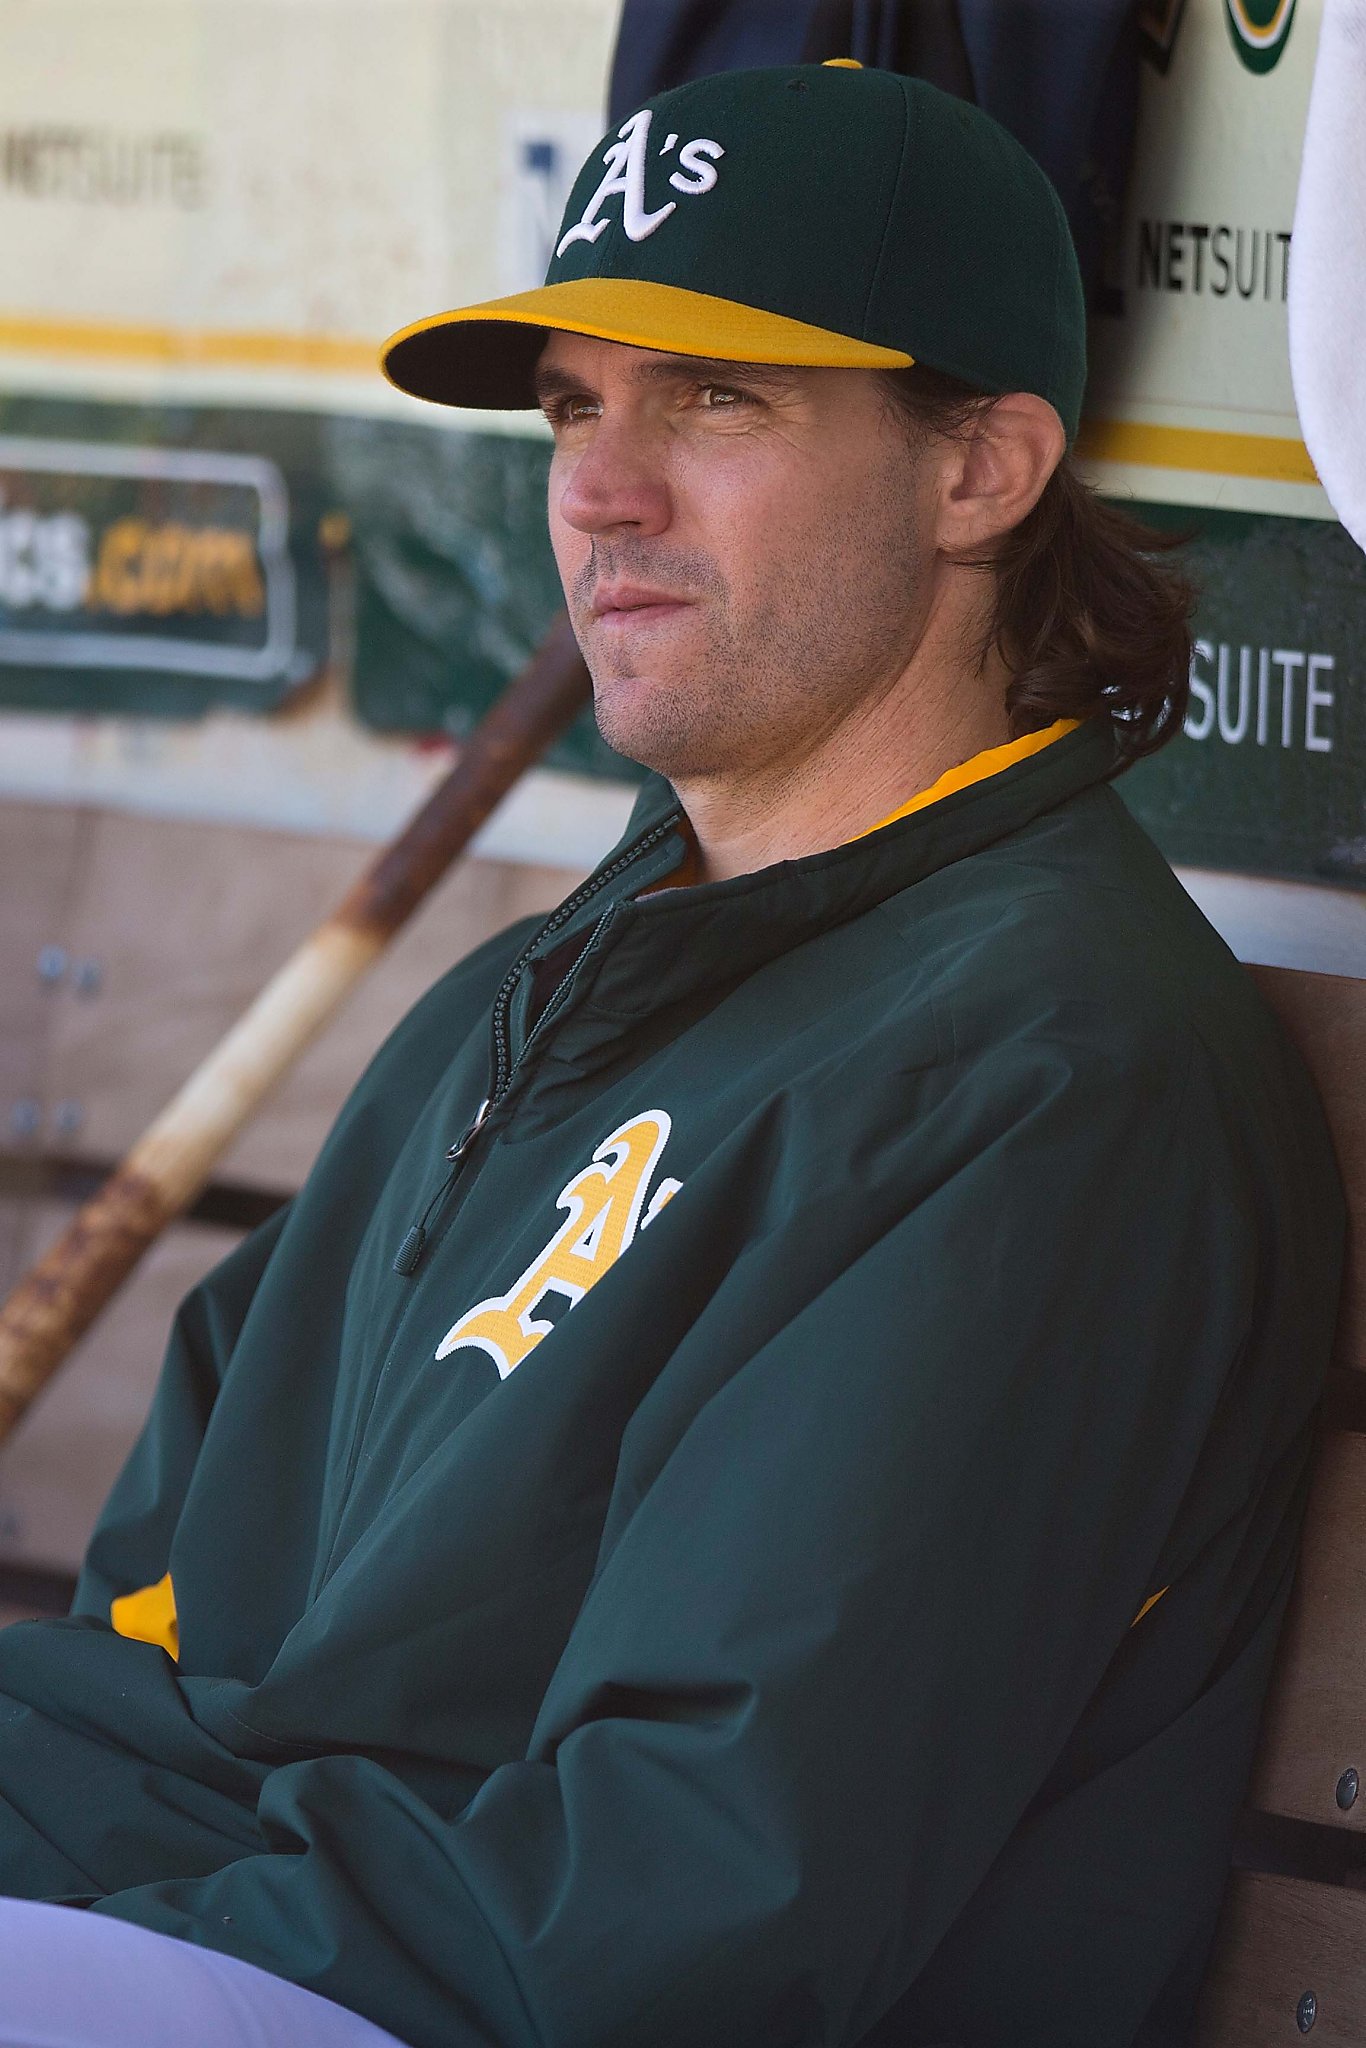 Sounds' Barry Zito called up by A's